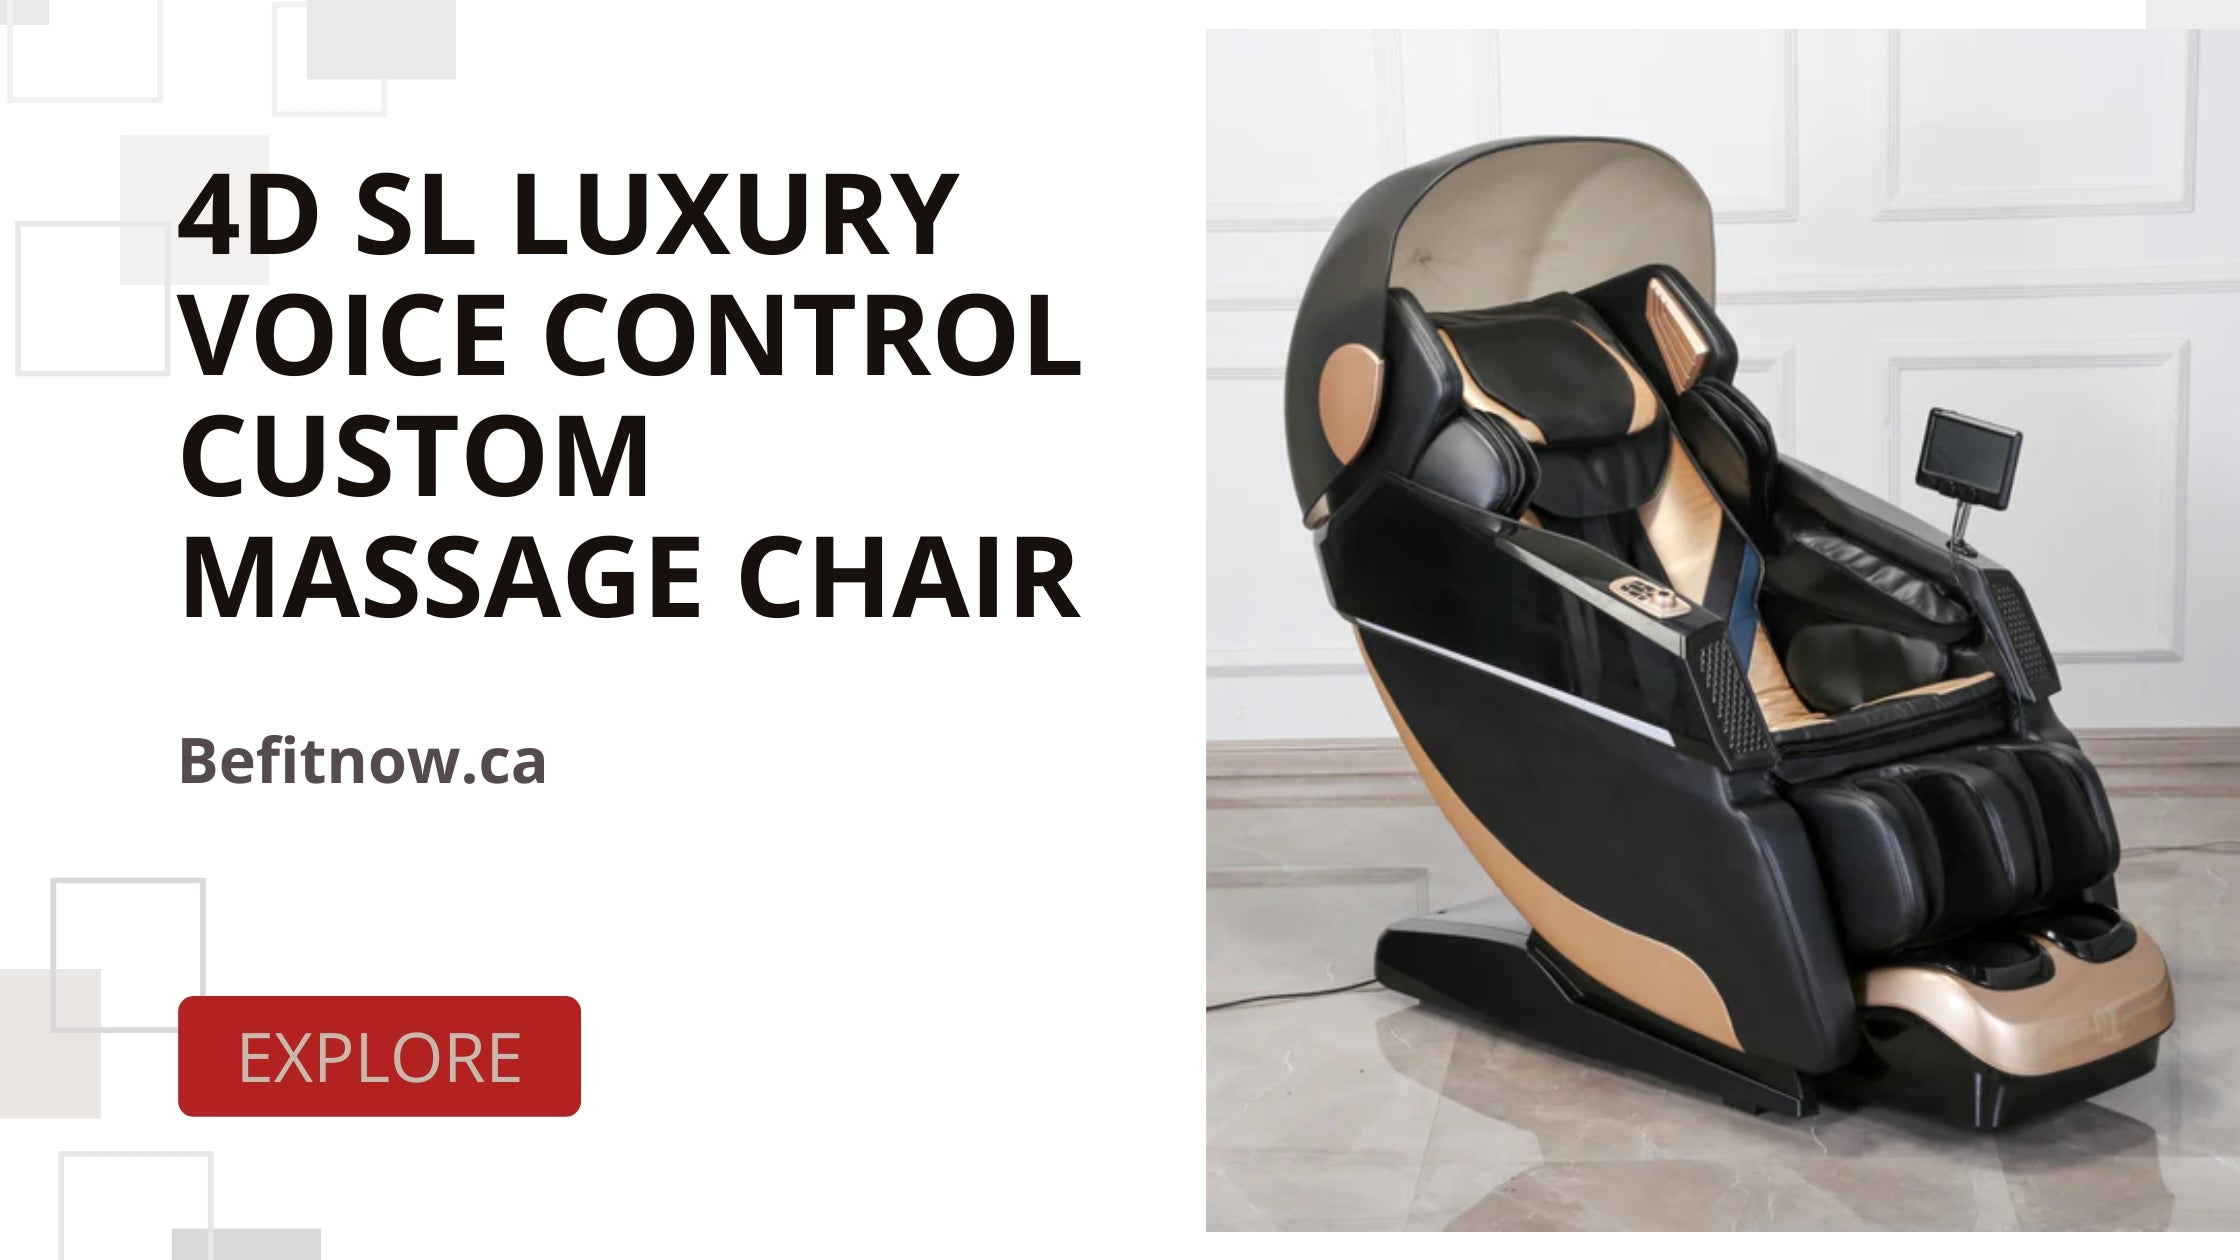 Chill Out in Style: The 4D Luxury Voice Control Massage Chair